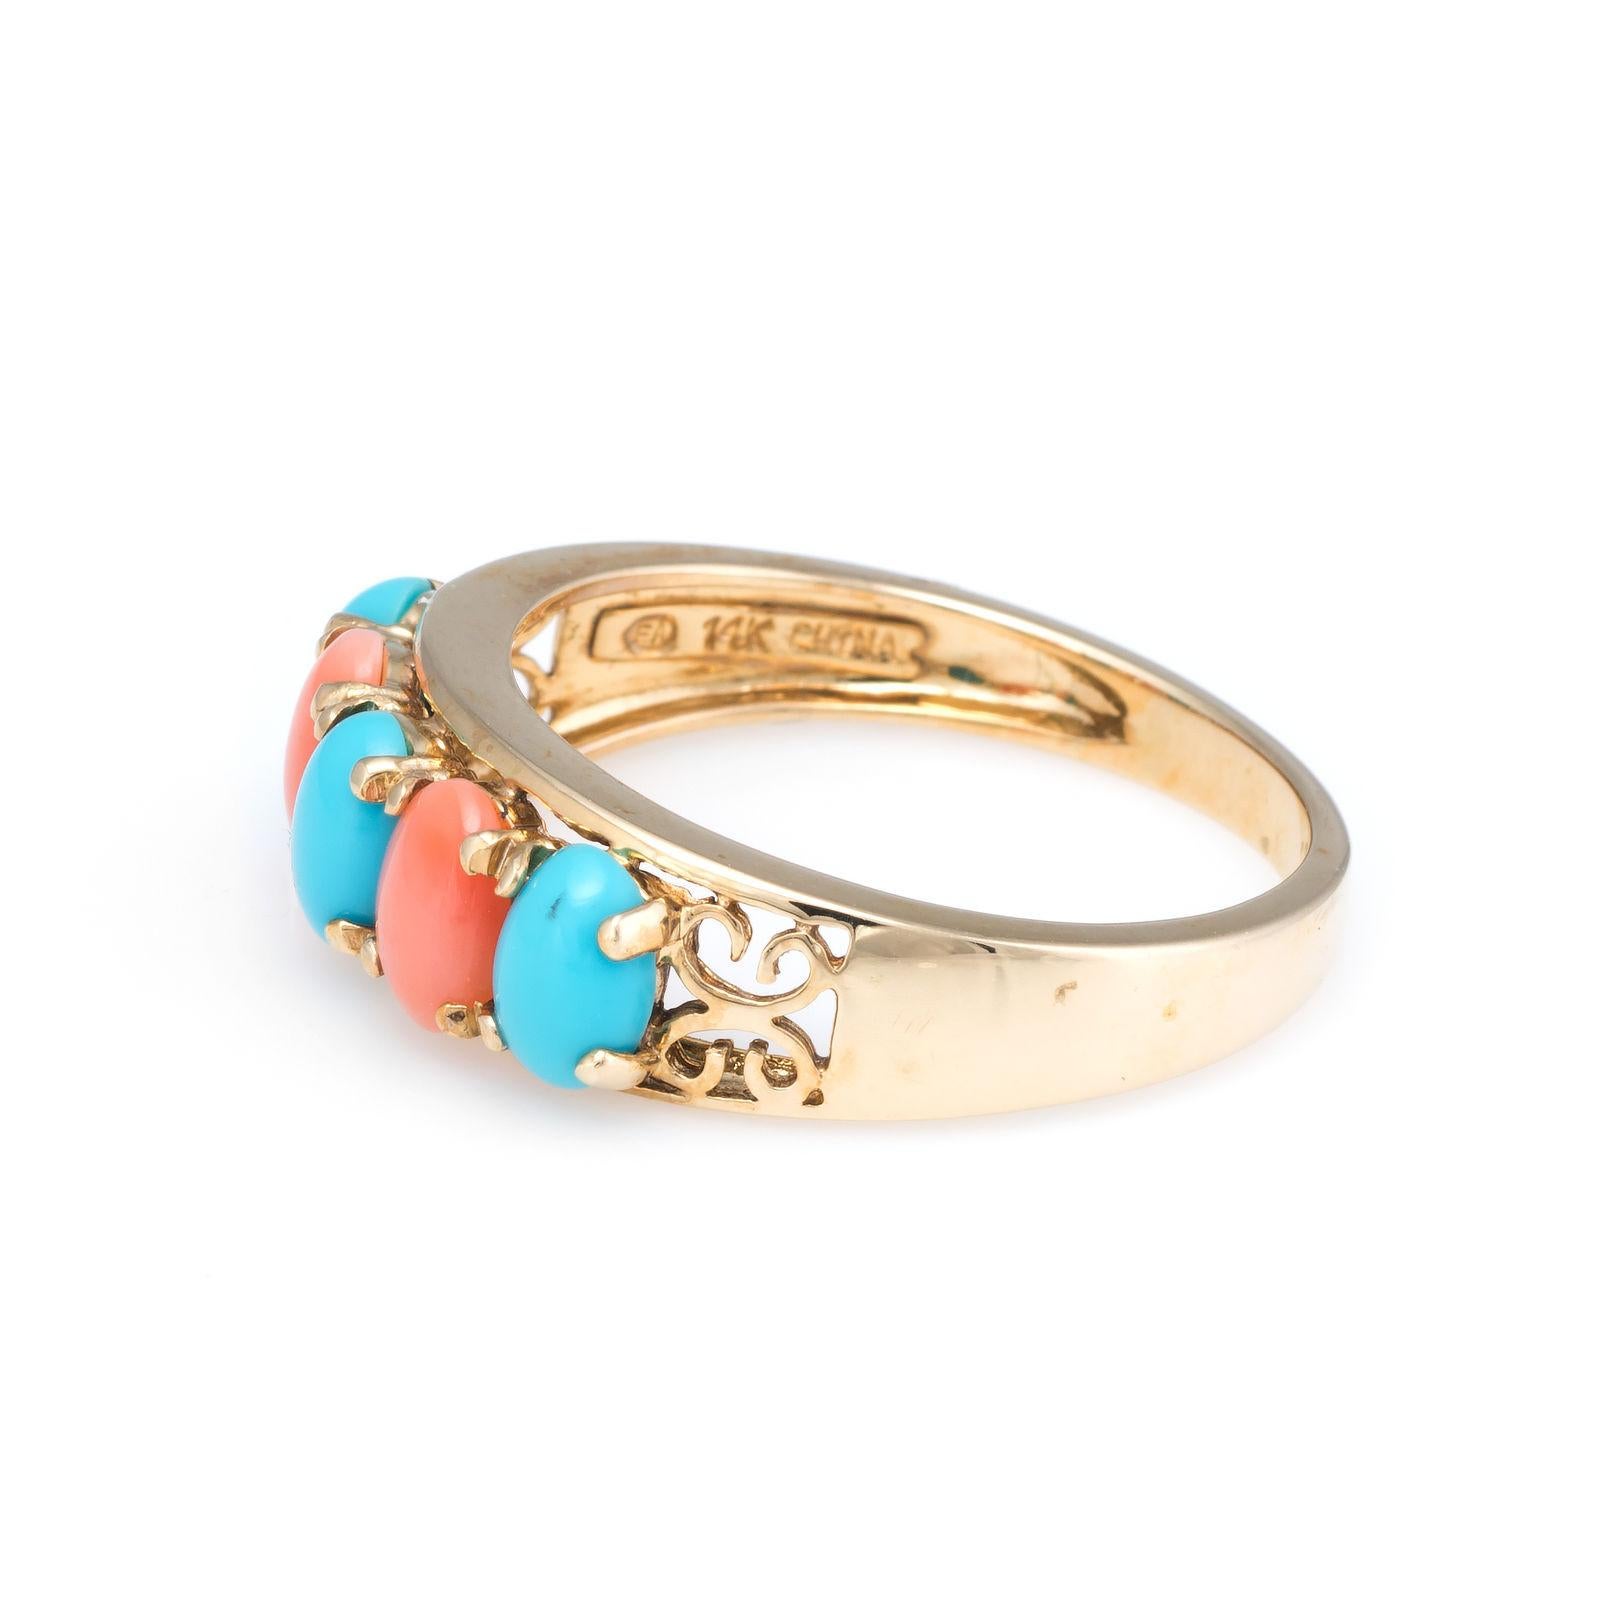 Oval Cut Vintage Turquoise Coral Ring 14 Karat Yellow Gold Estate Fine Jewelry Band